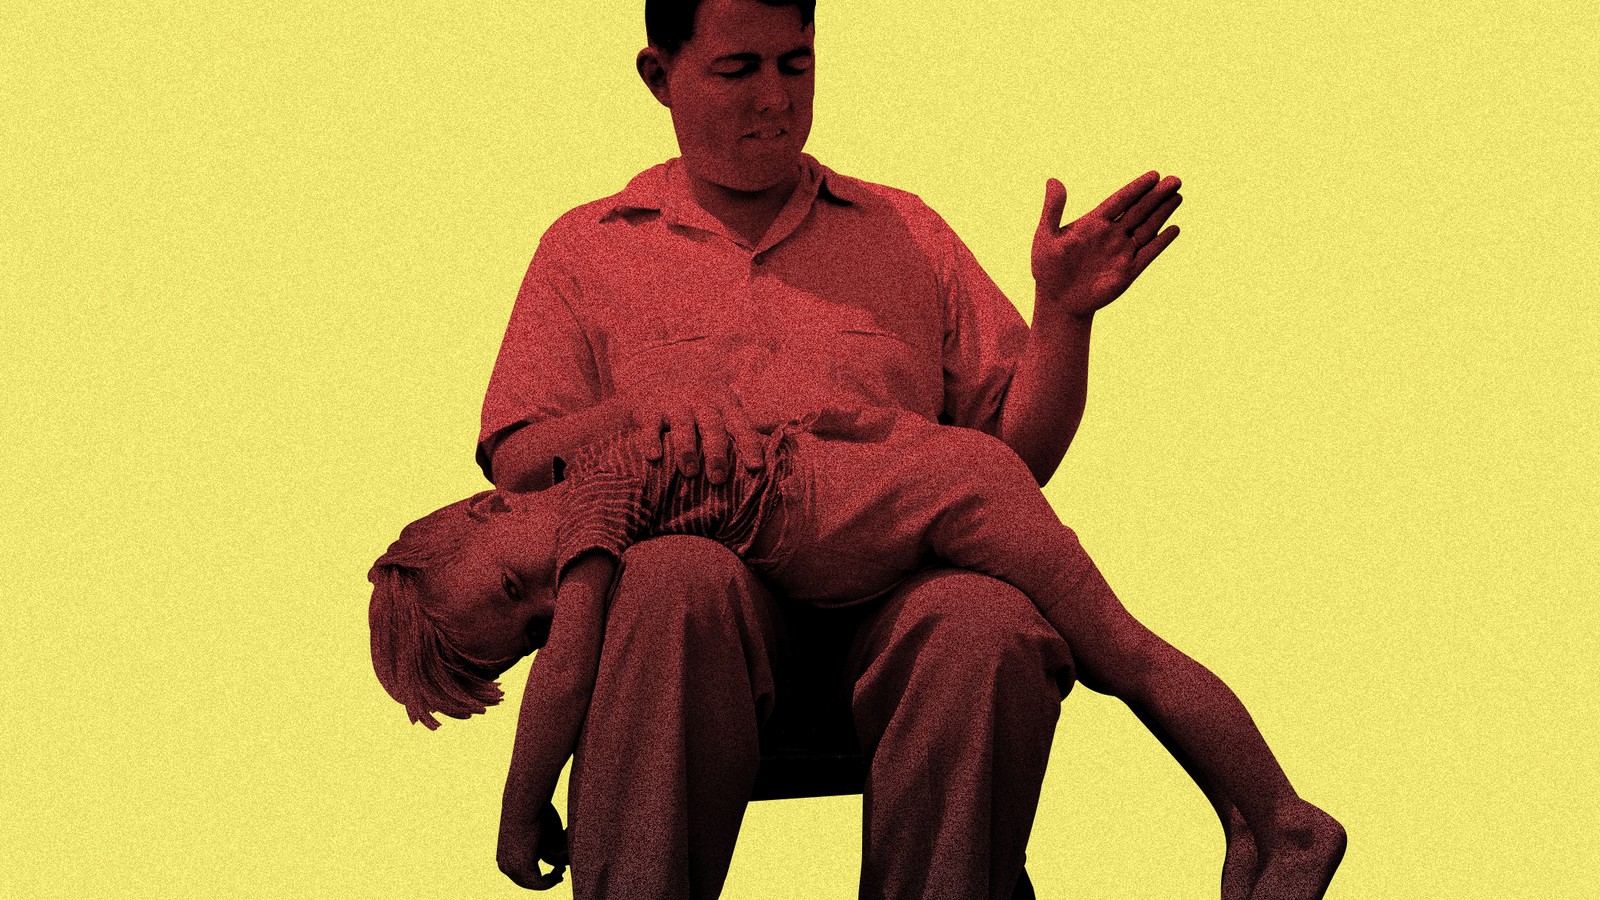 Spanking therapy